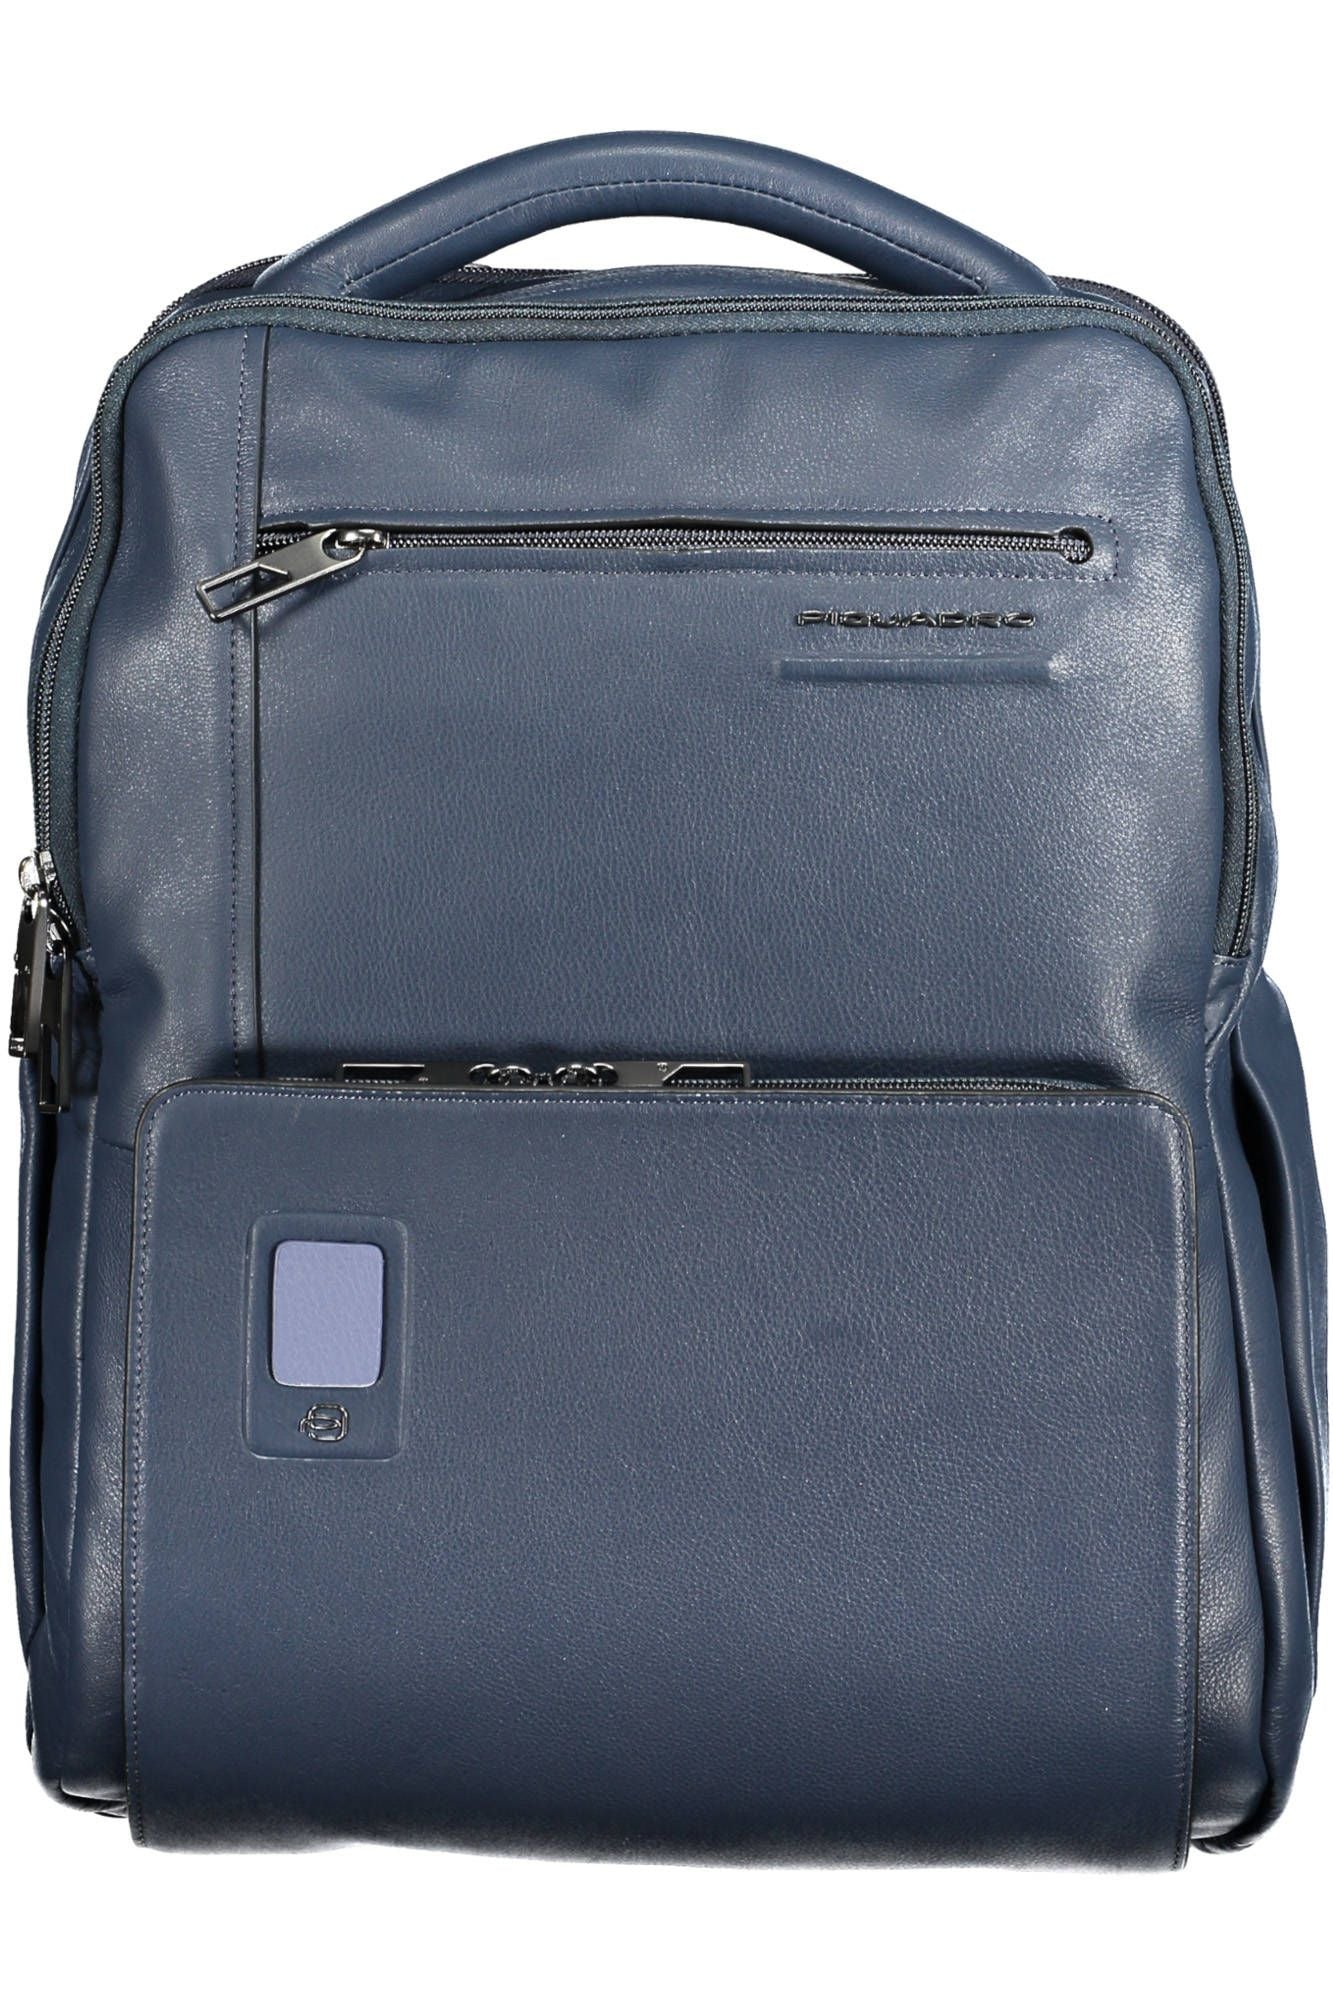 Elegant Leather Backpack with Secure Lock Features